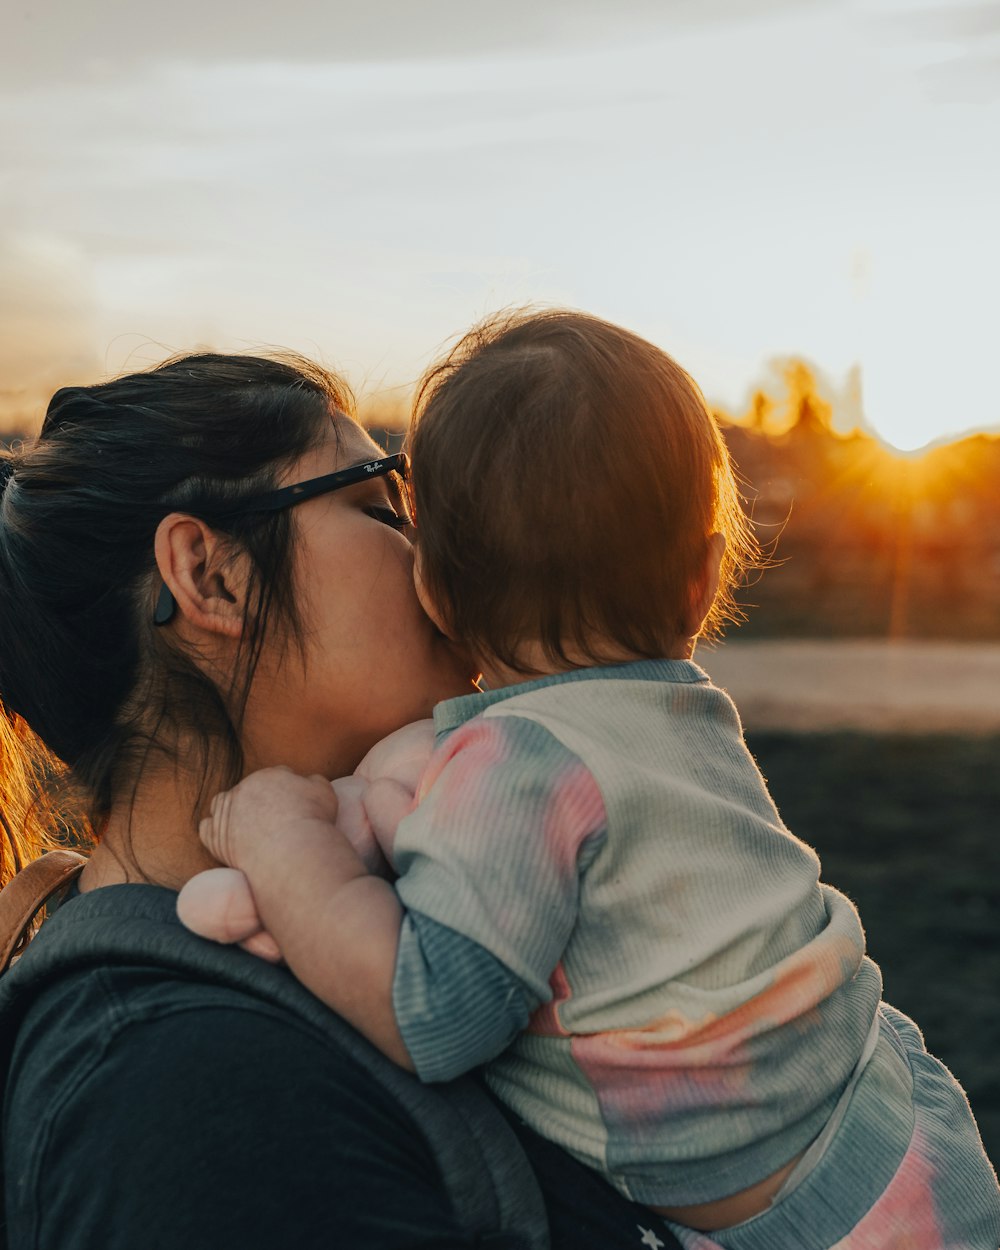 woman in black shirt carrying baby in white and pink jacket during sunset